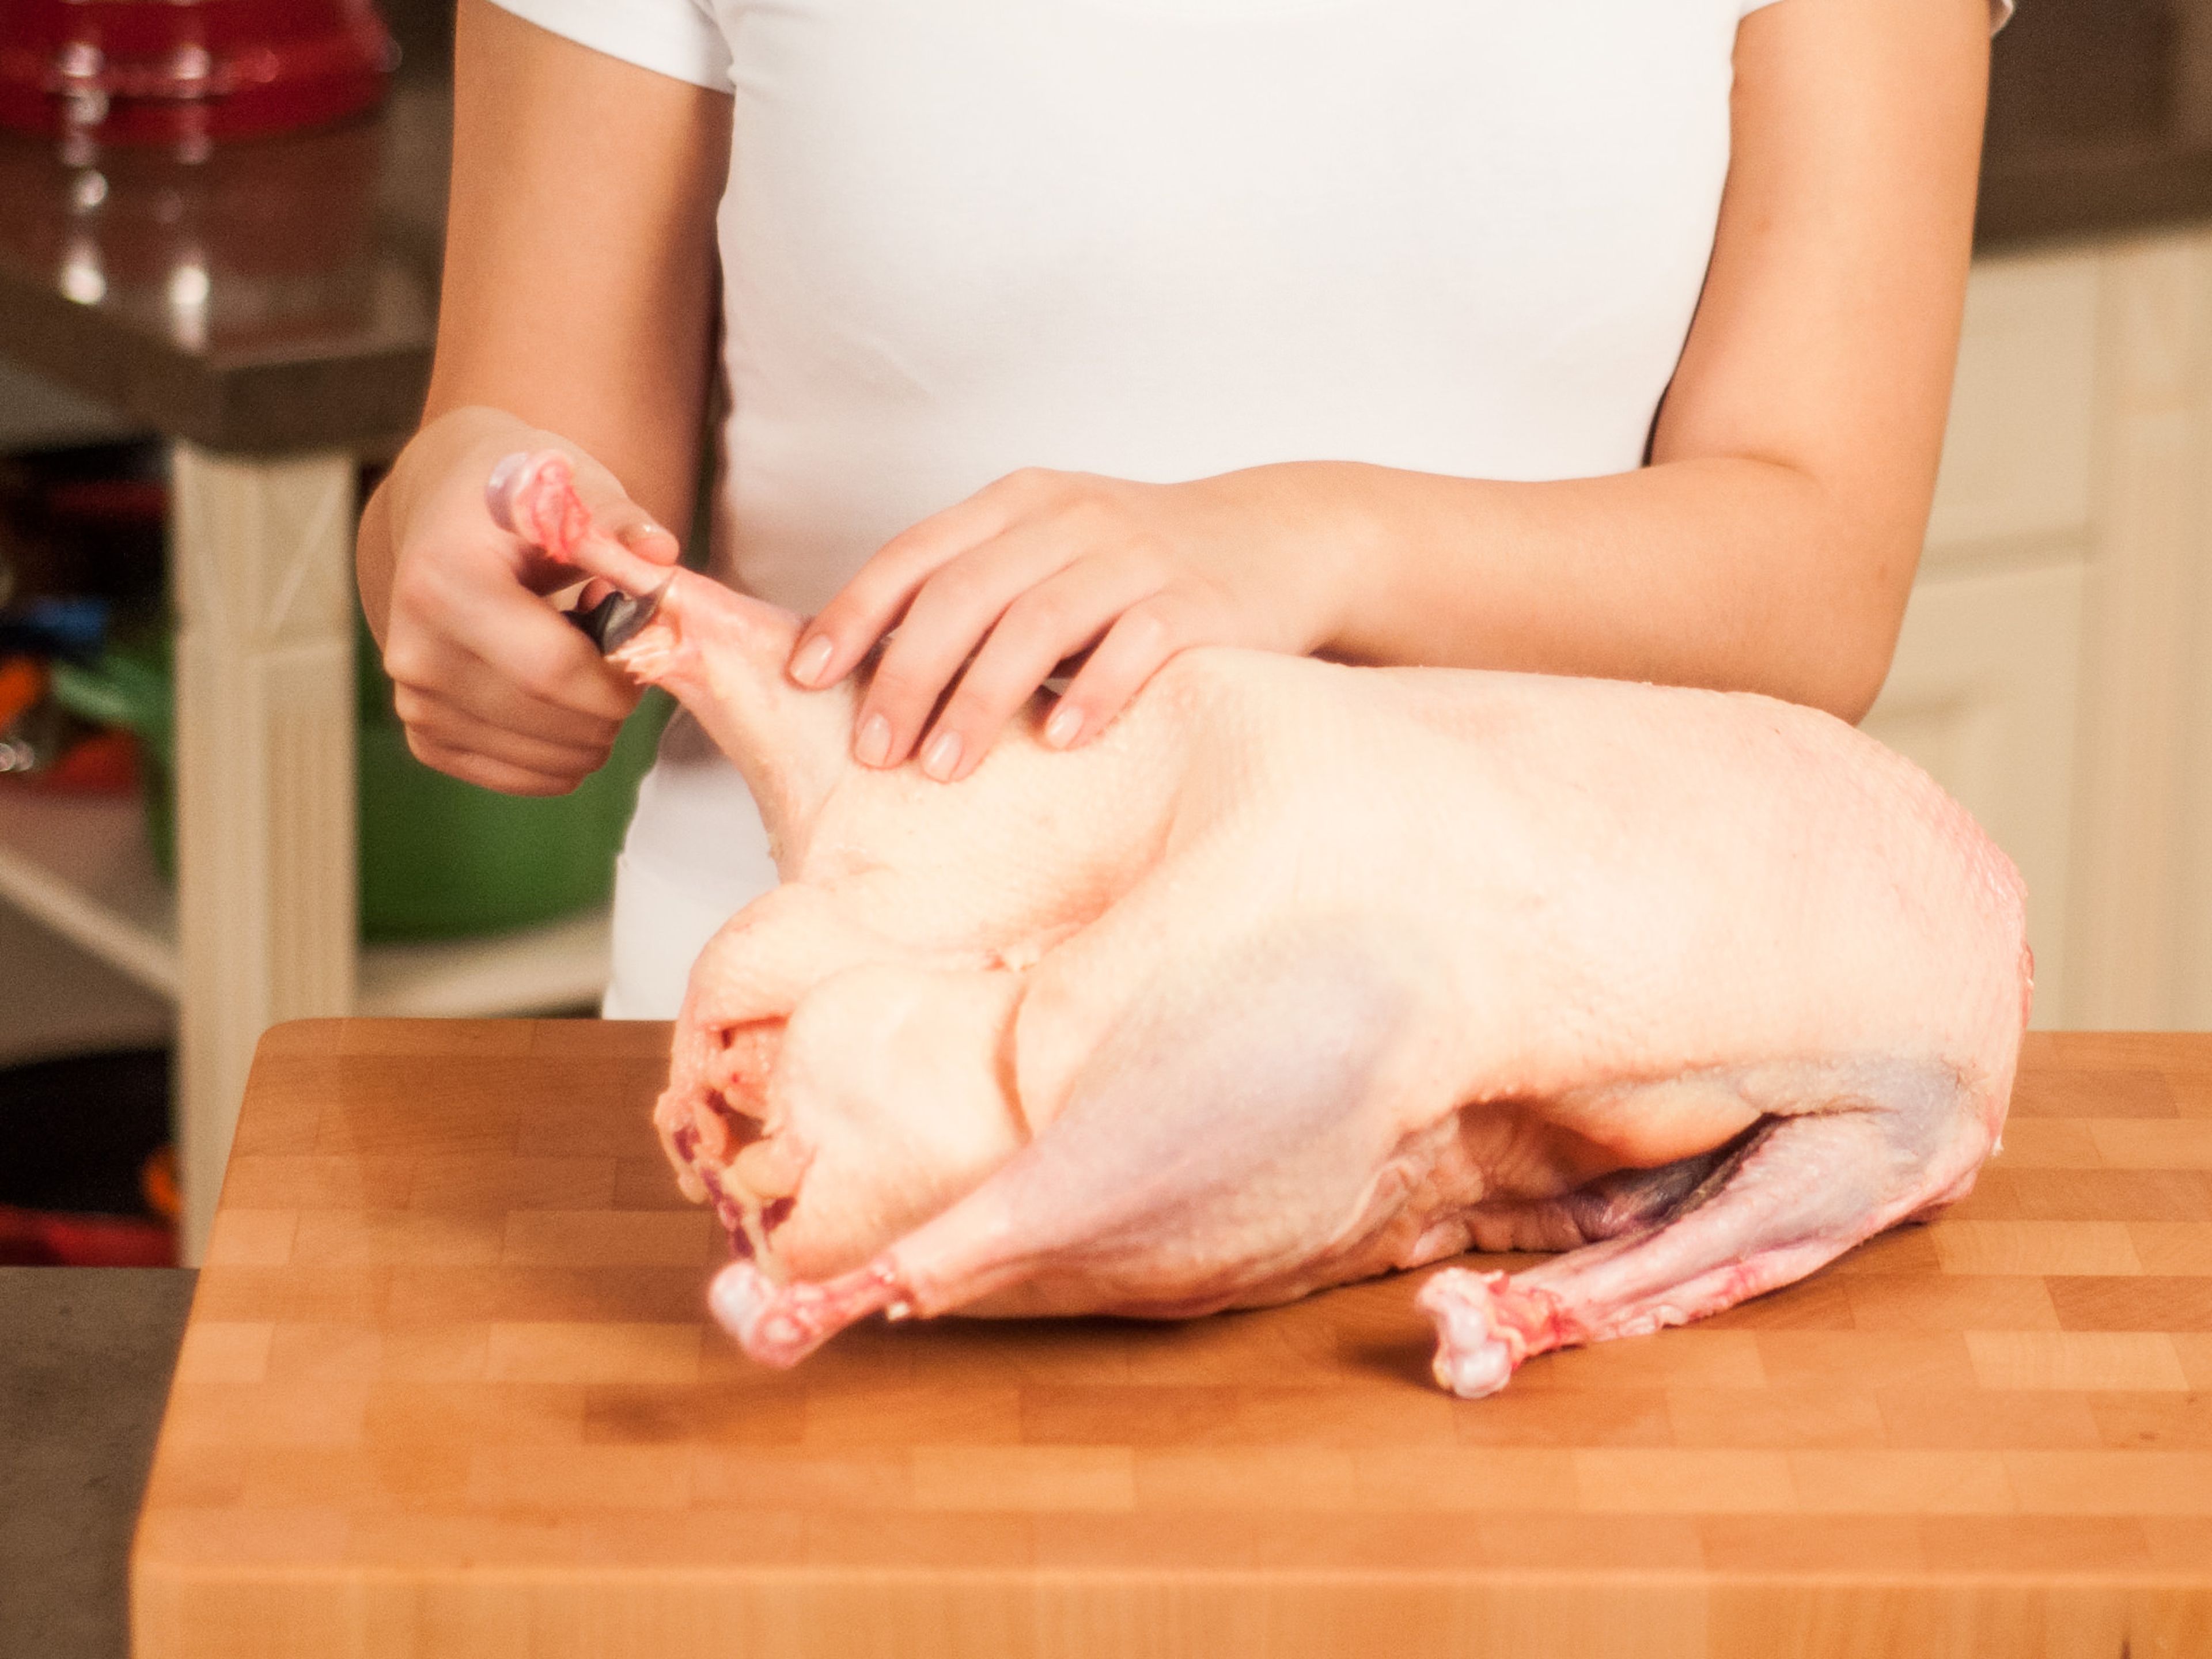 With a sharp knife, trim skin around goose ankles to loosen skin and allow fat to render while cooking.